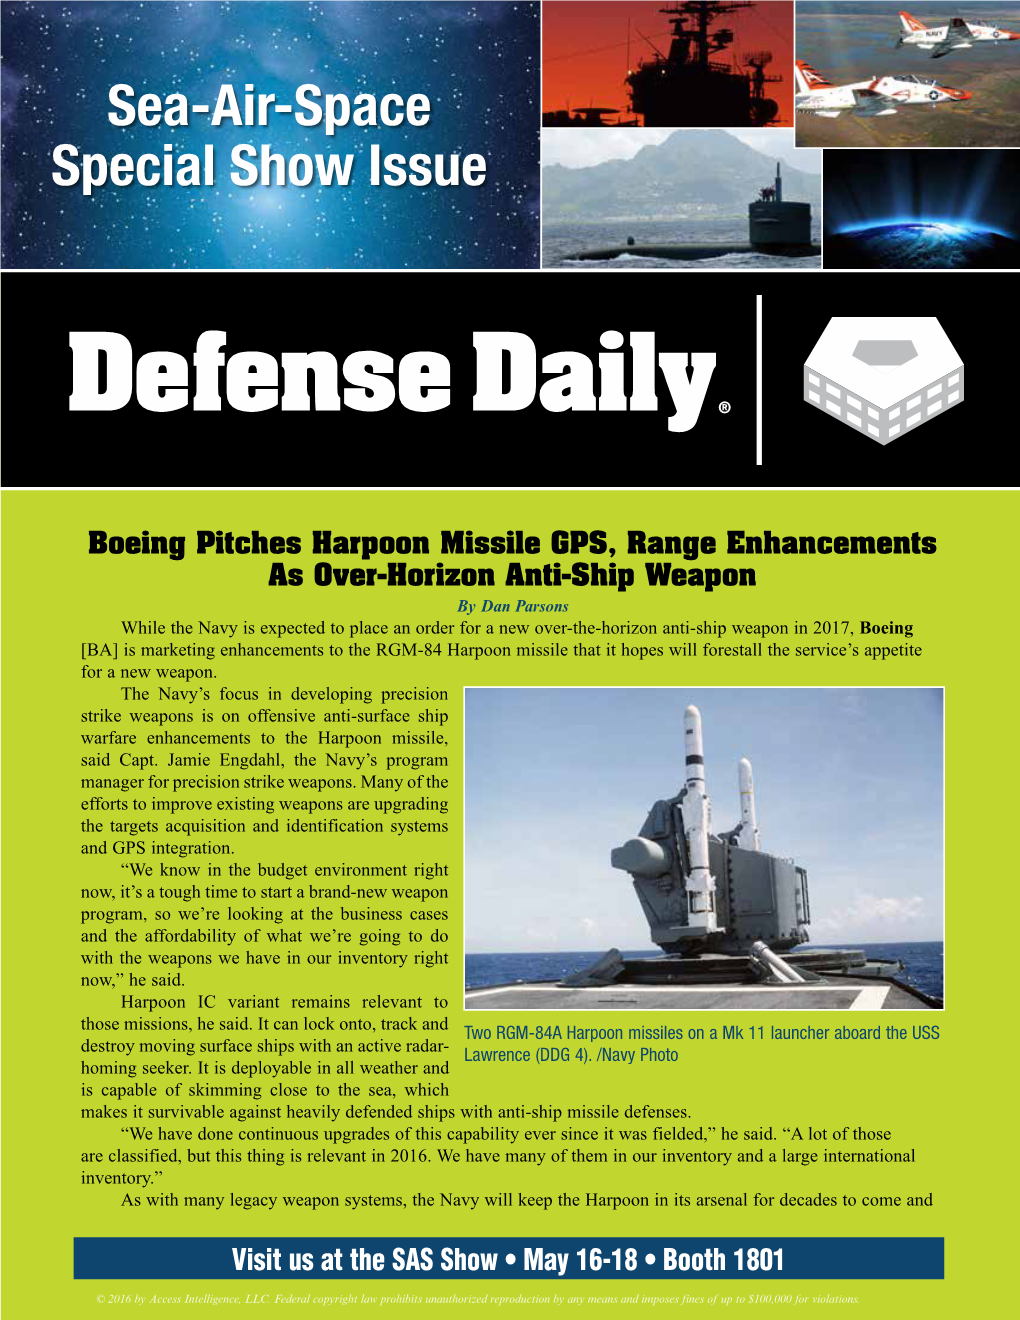 Sea-Air-Space Special Show Issue